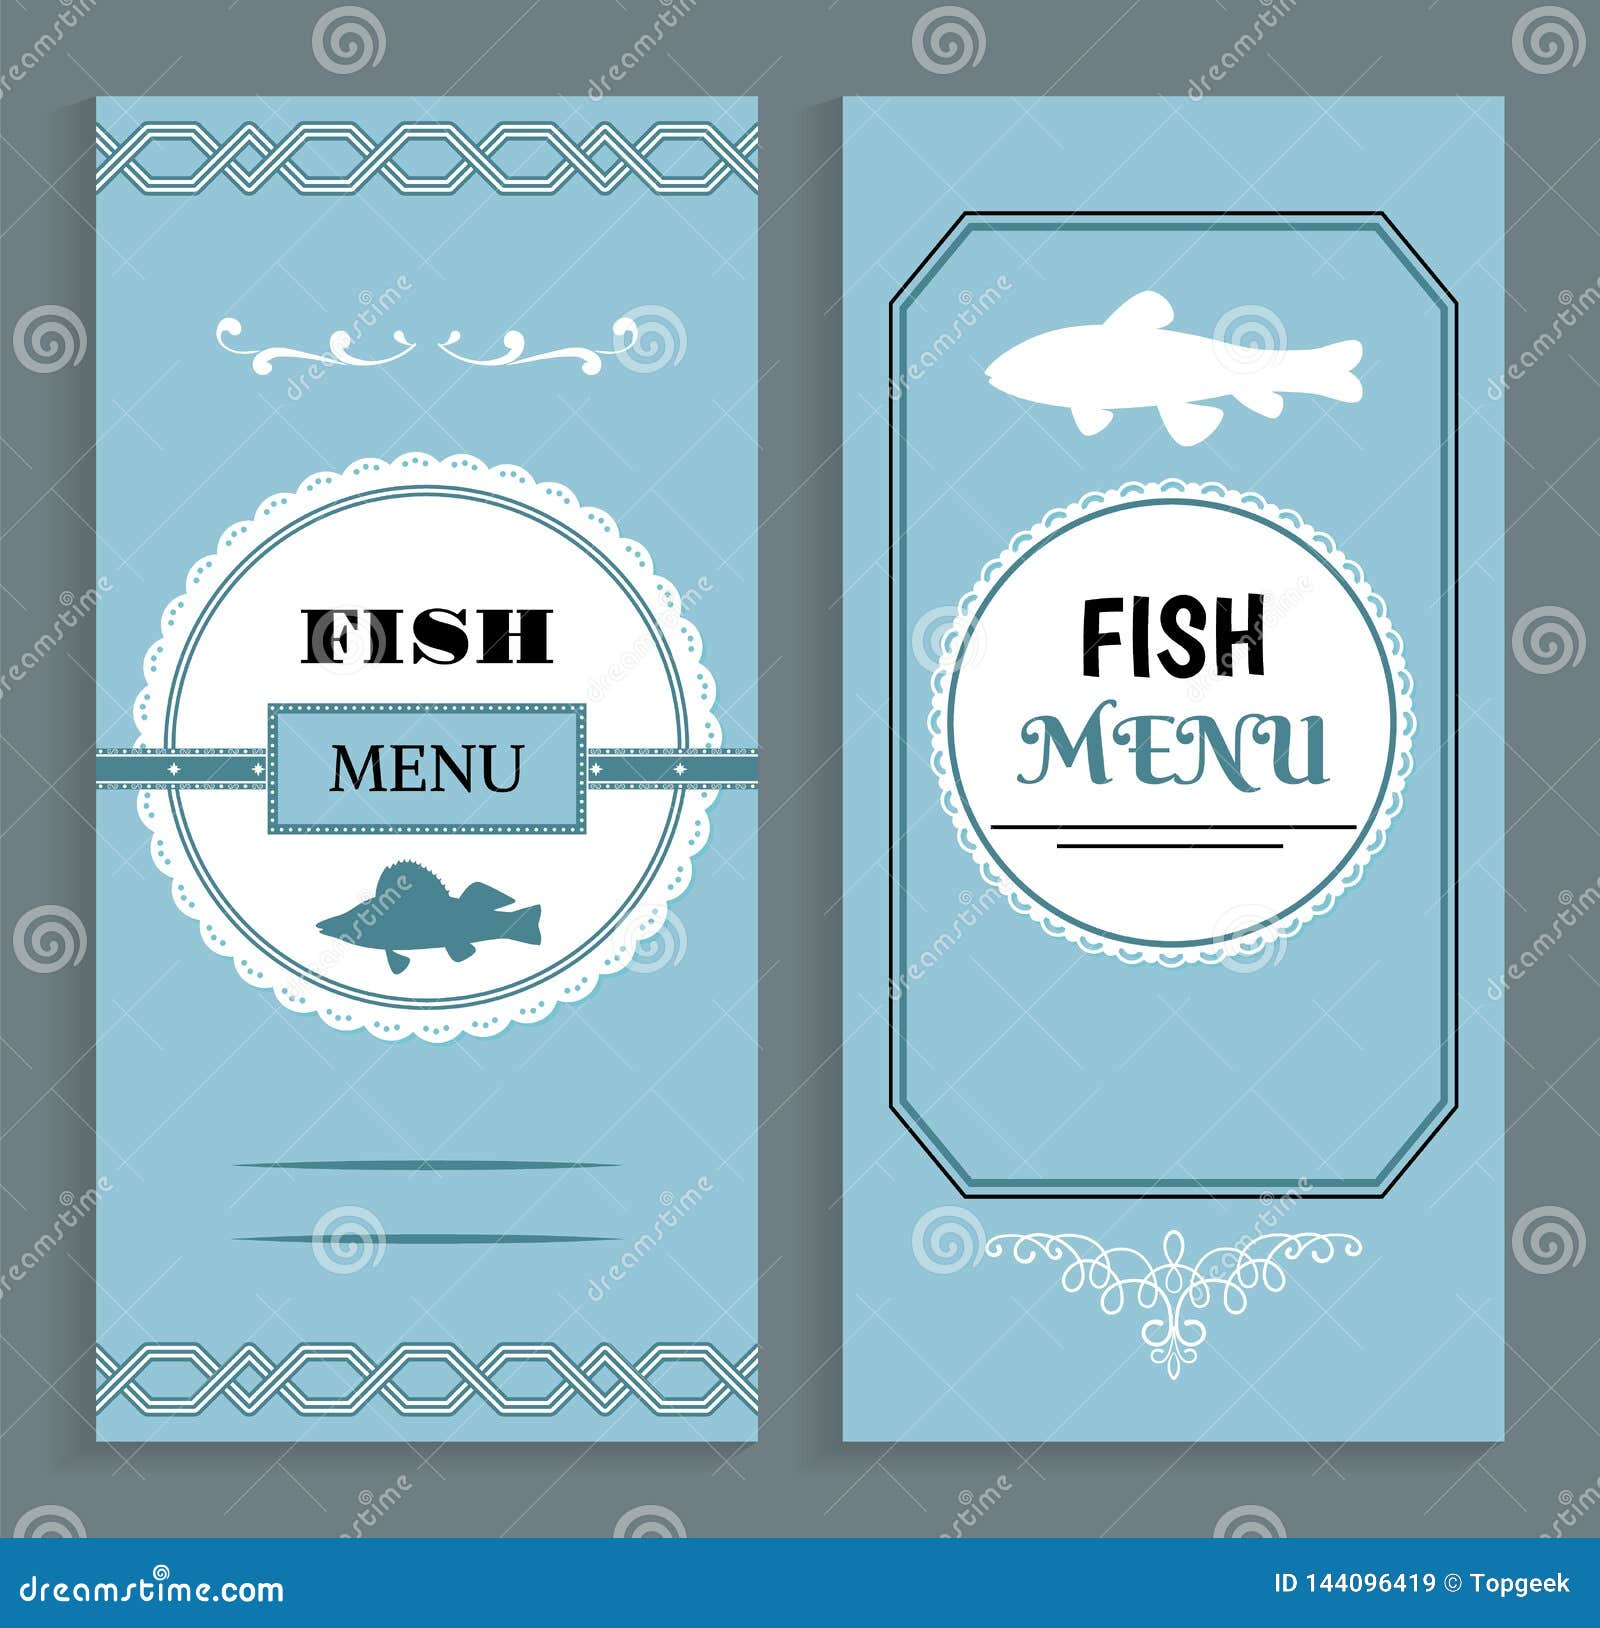 Fish Menu Template, Vector Seafood Dishes List Stock Vector ...